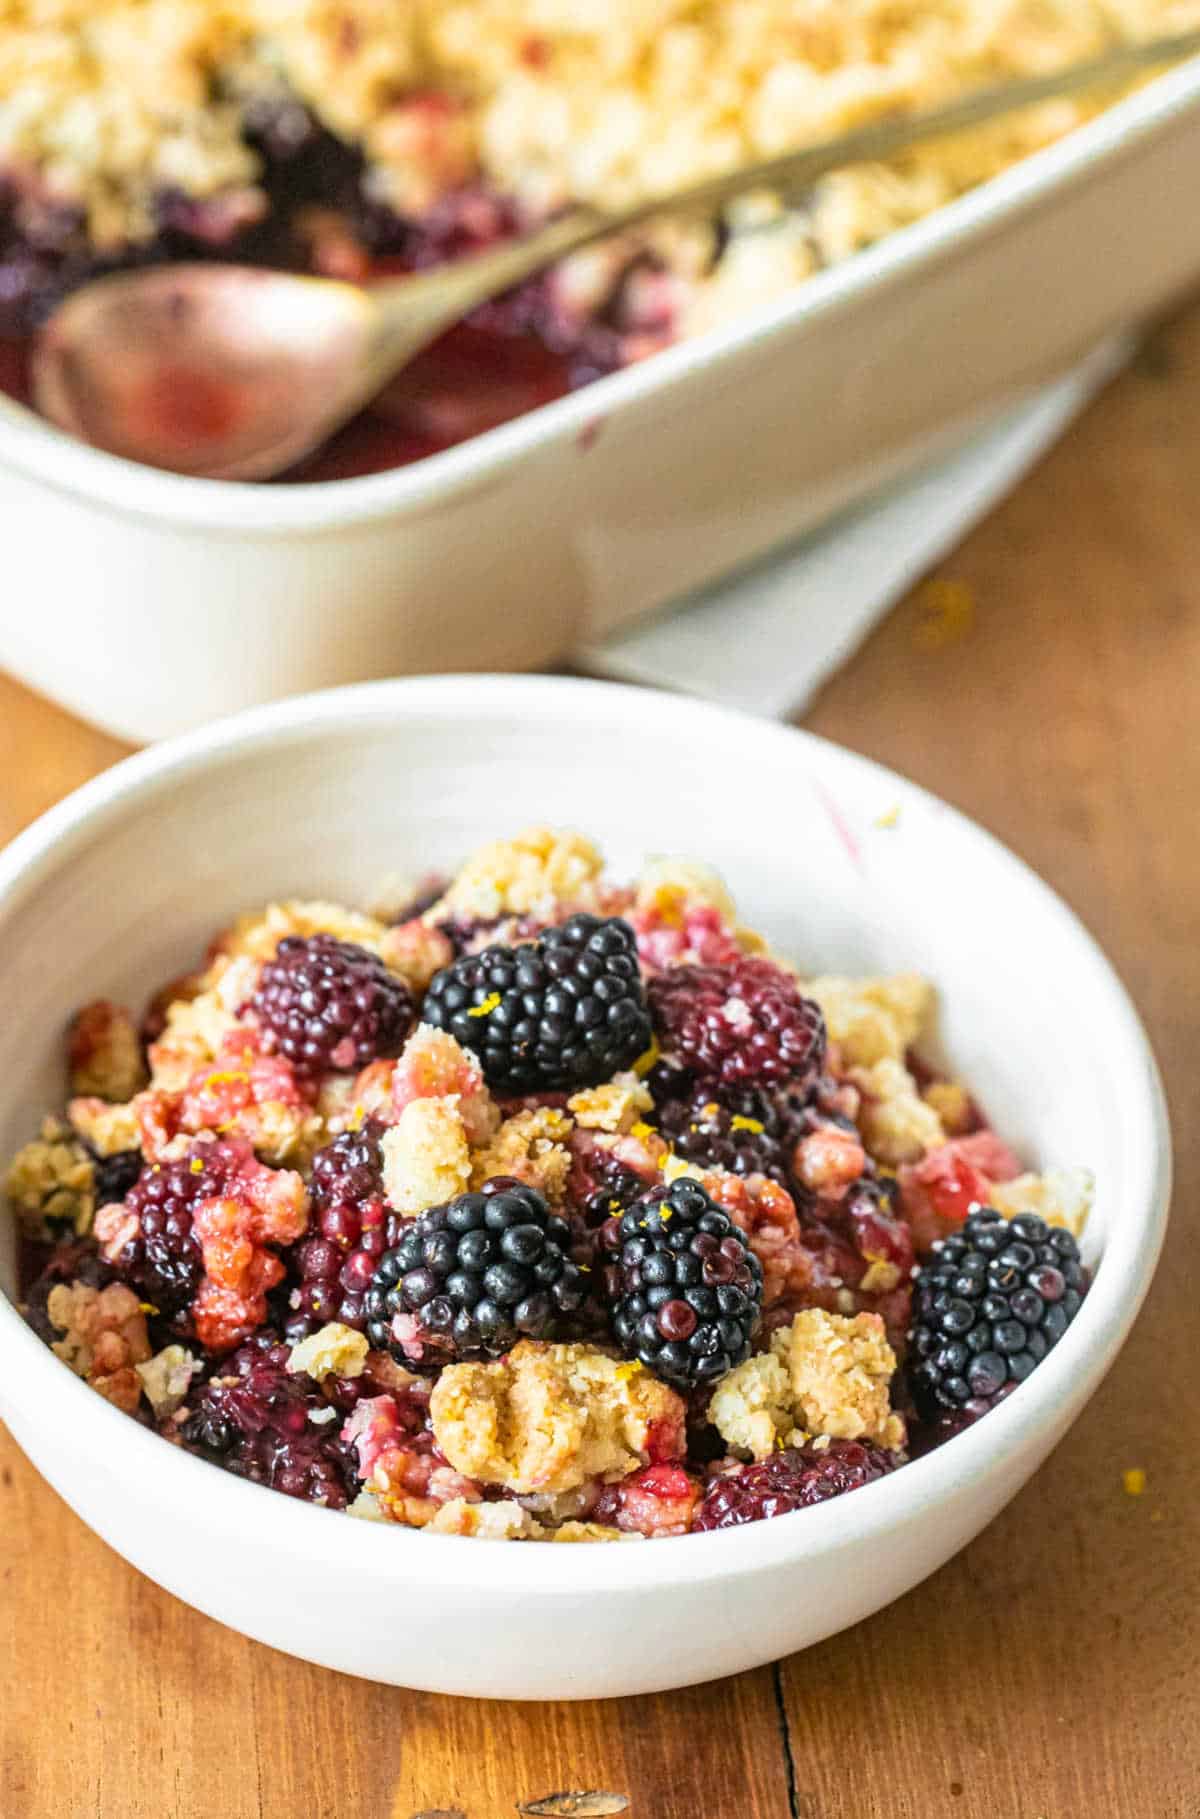 White bowl with blackberry crumble serving on a wooden table. Dish in background.